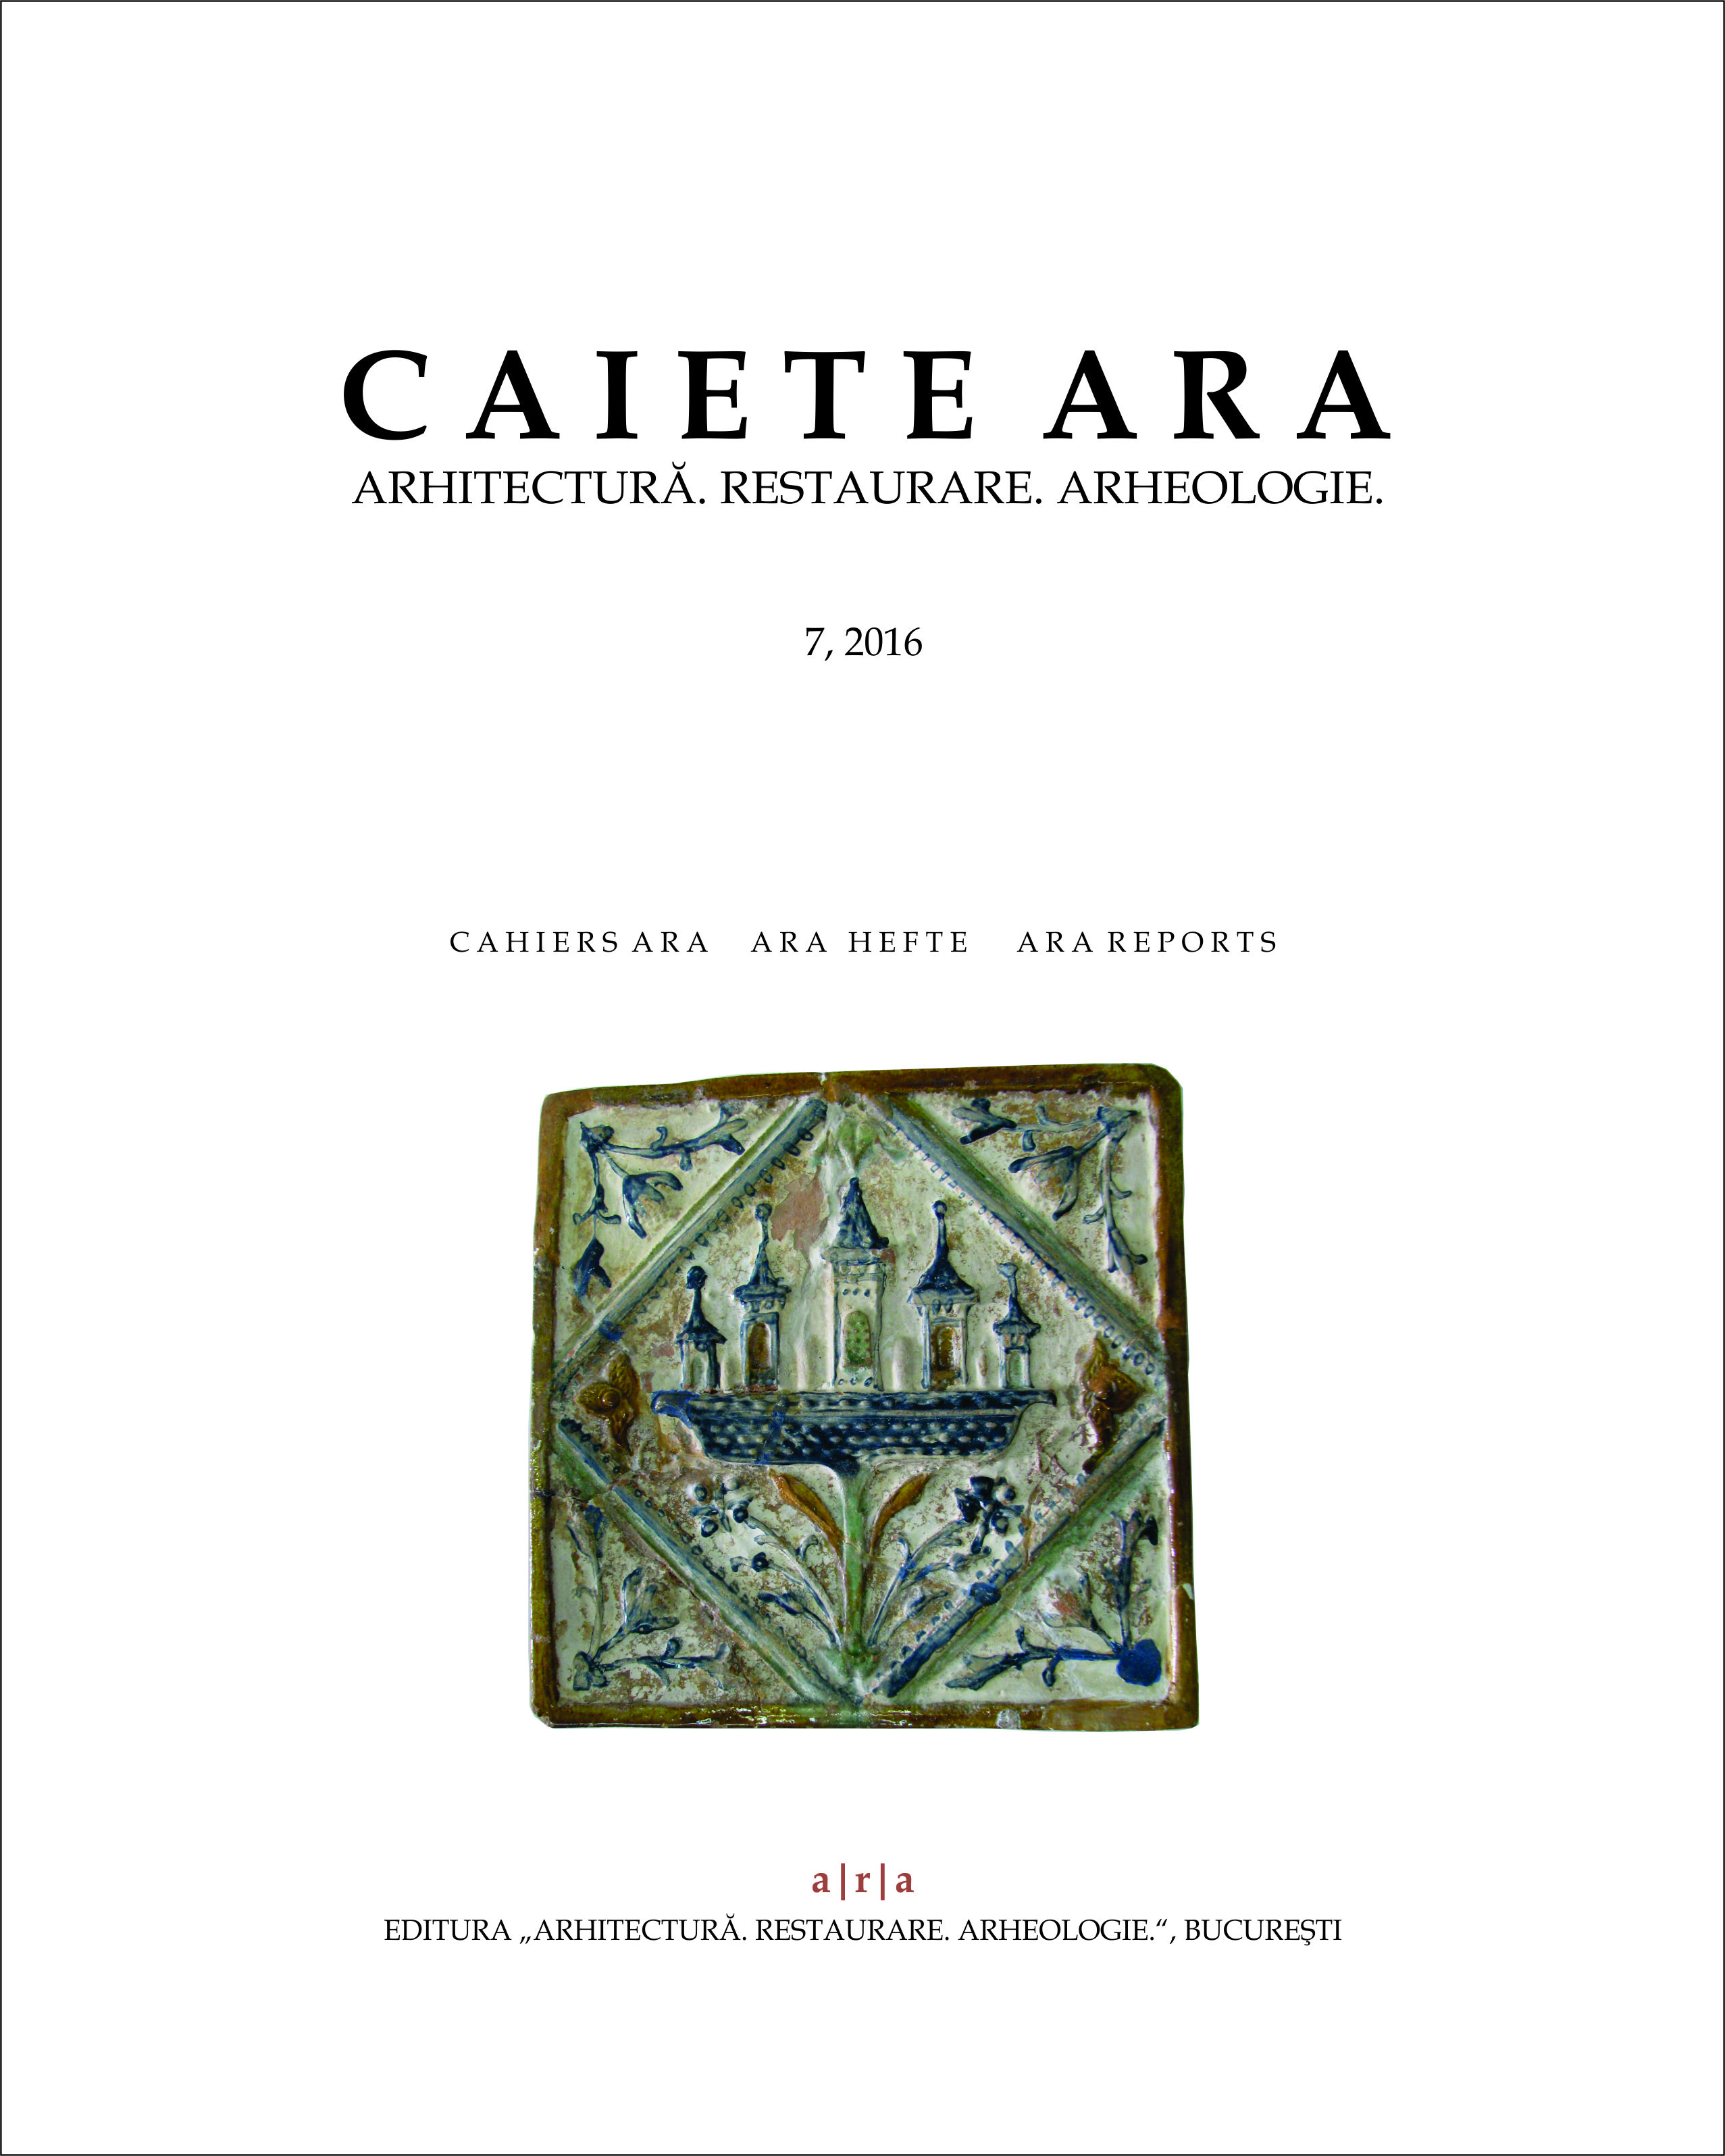 Representations of ornaments inspired by Romanian architecture on Wallachian medieval stove tiless from the 15th-17th centuries Cover Image